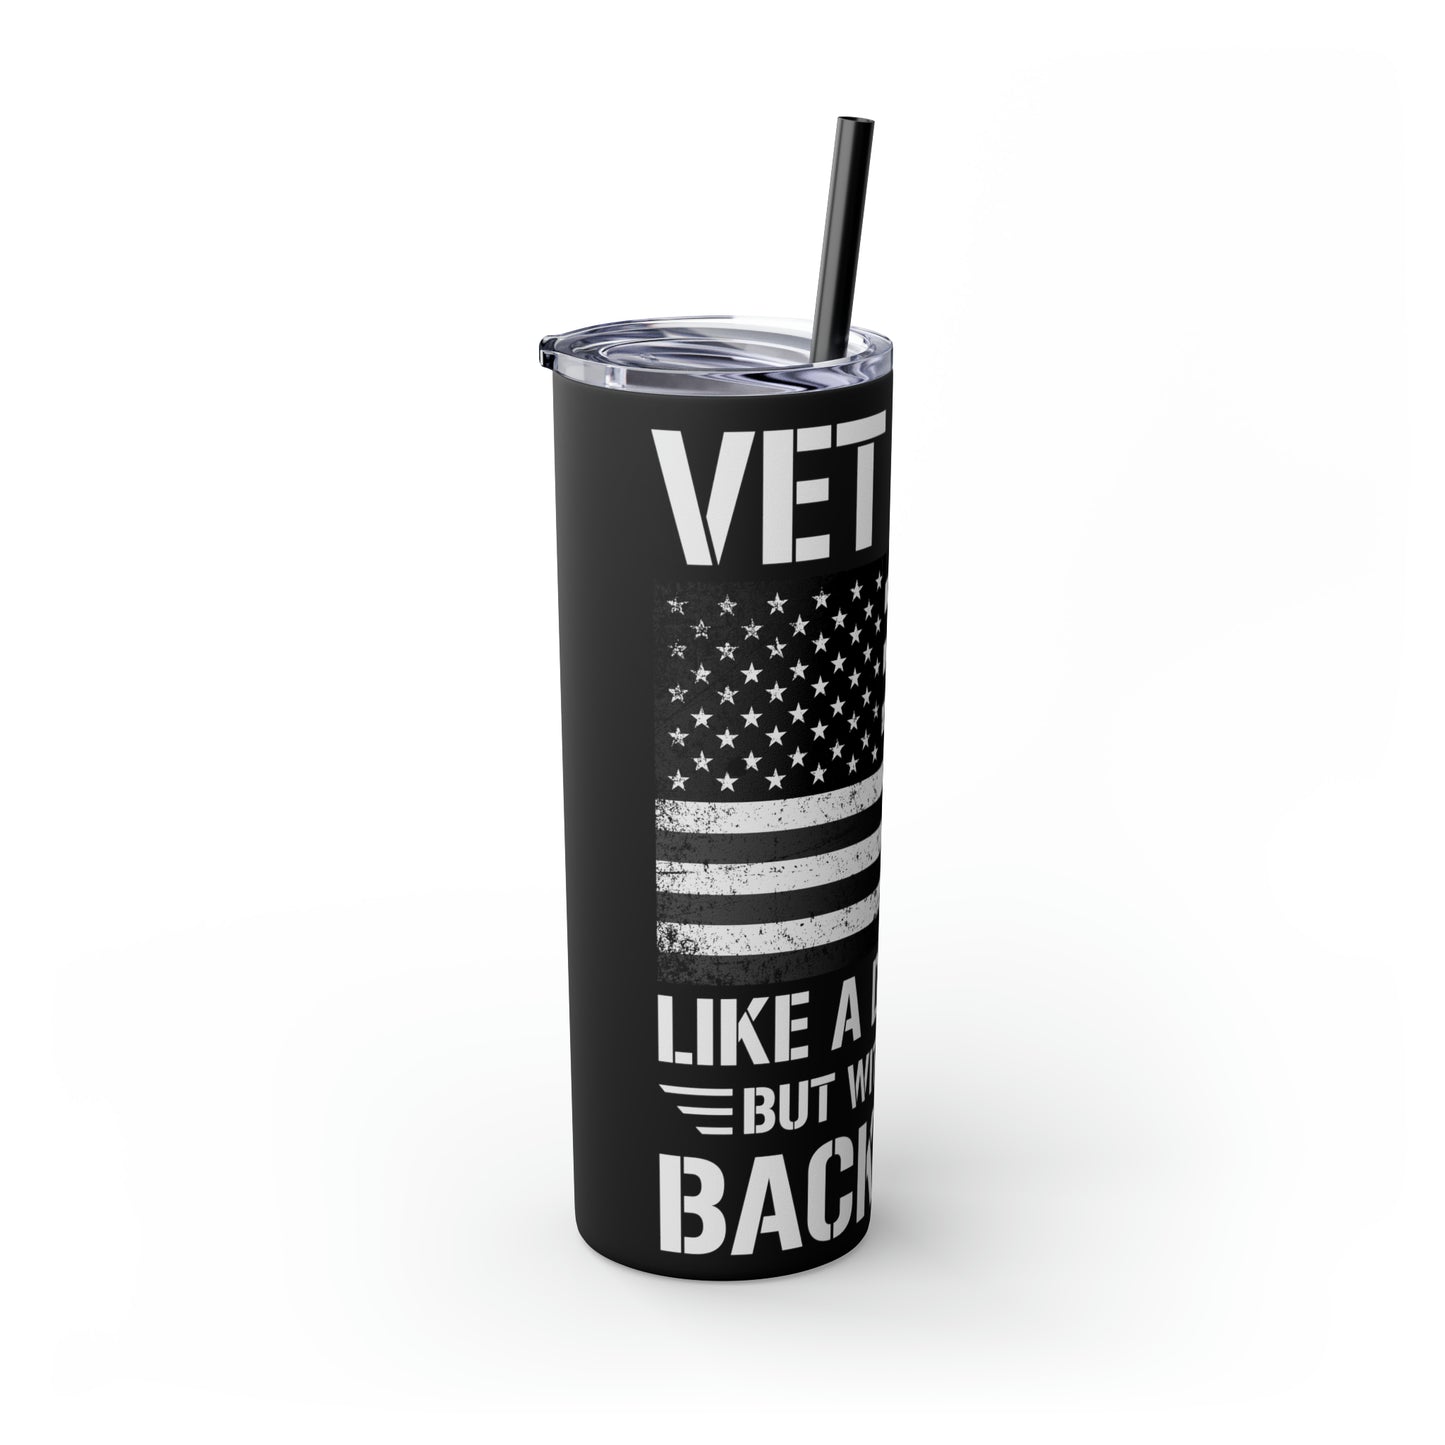 Vet Bod Like a Dad Bod But With More Back Pain Skinny Tumbler with Straw, 20oz